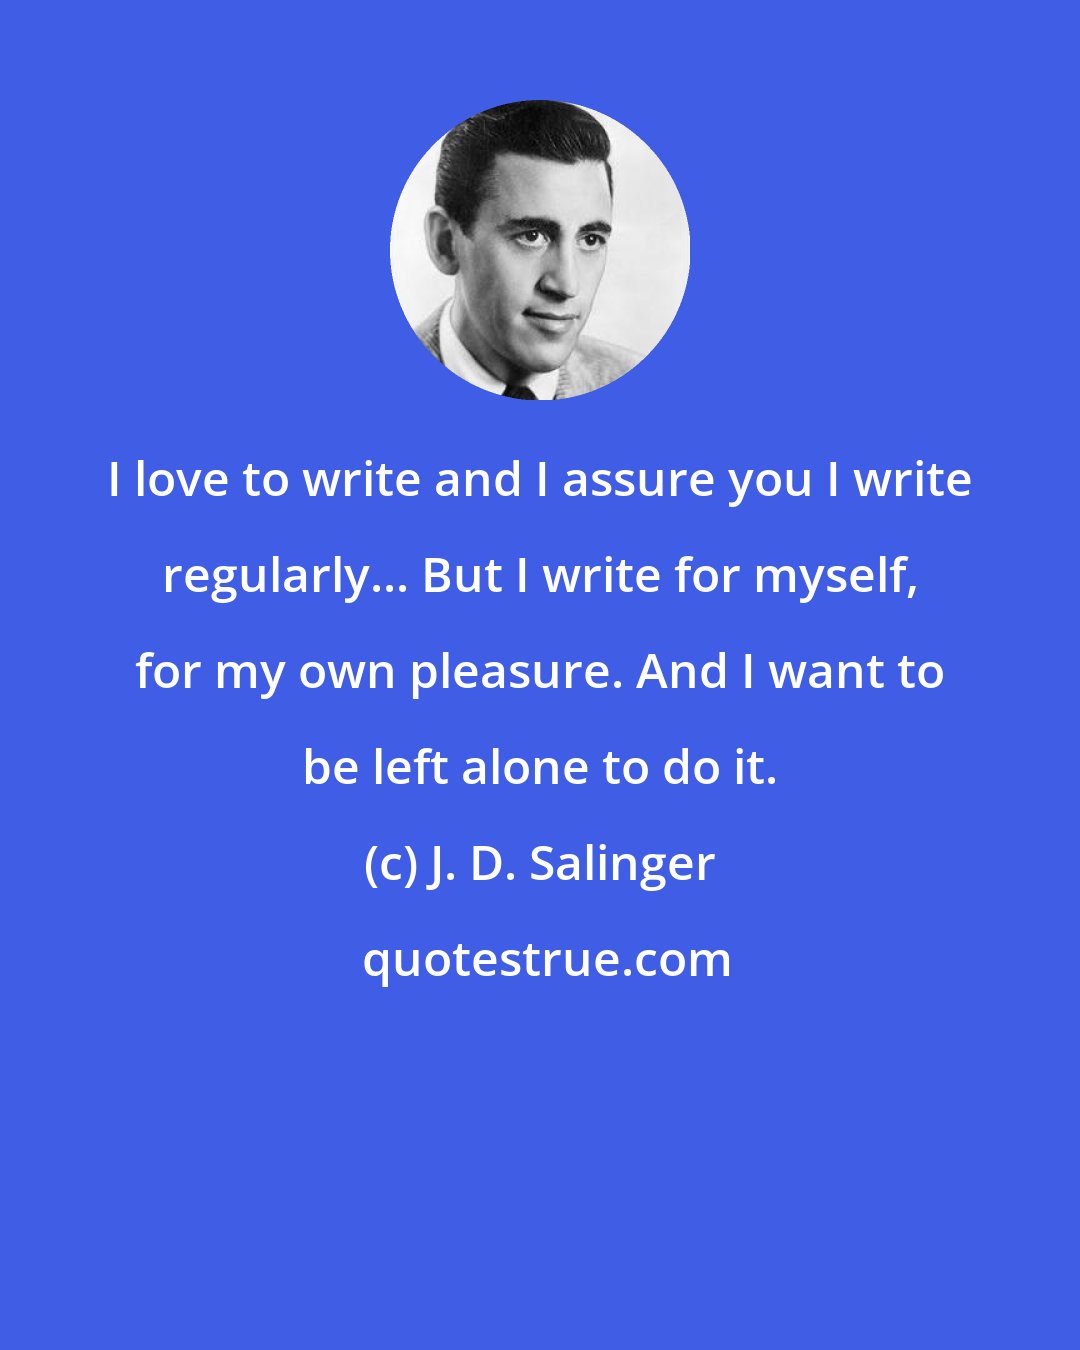 J. D. Salinger: I love to write and I assure you I write regularly... But I write for myself, for my own pleasure. And I want to be left alone to do it.